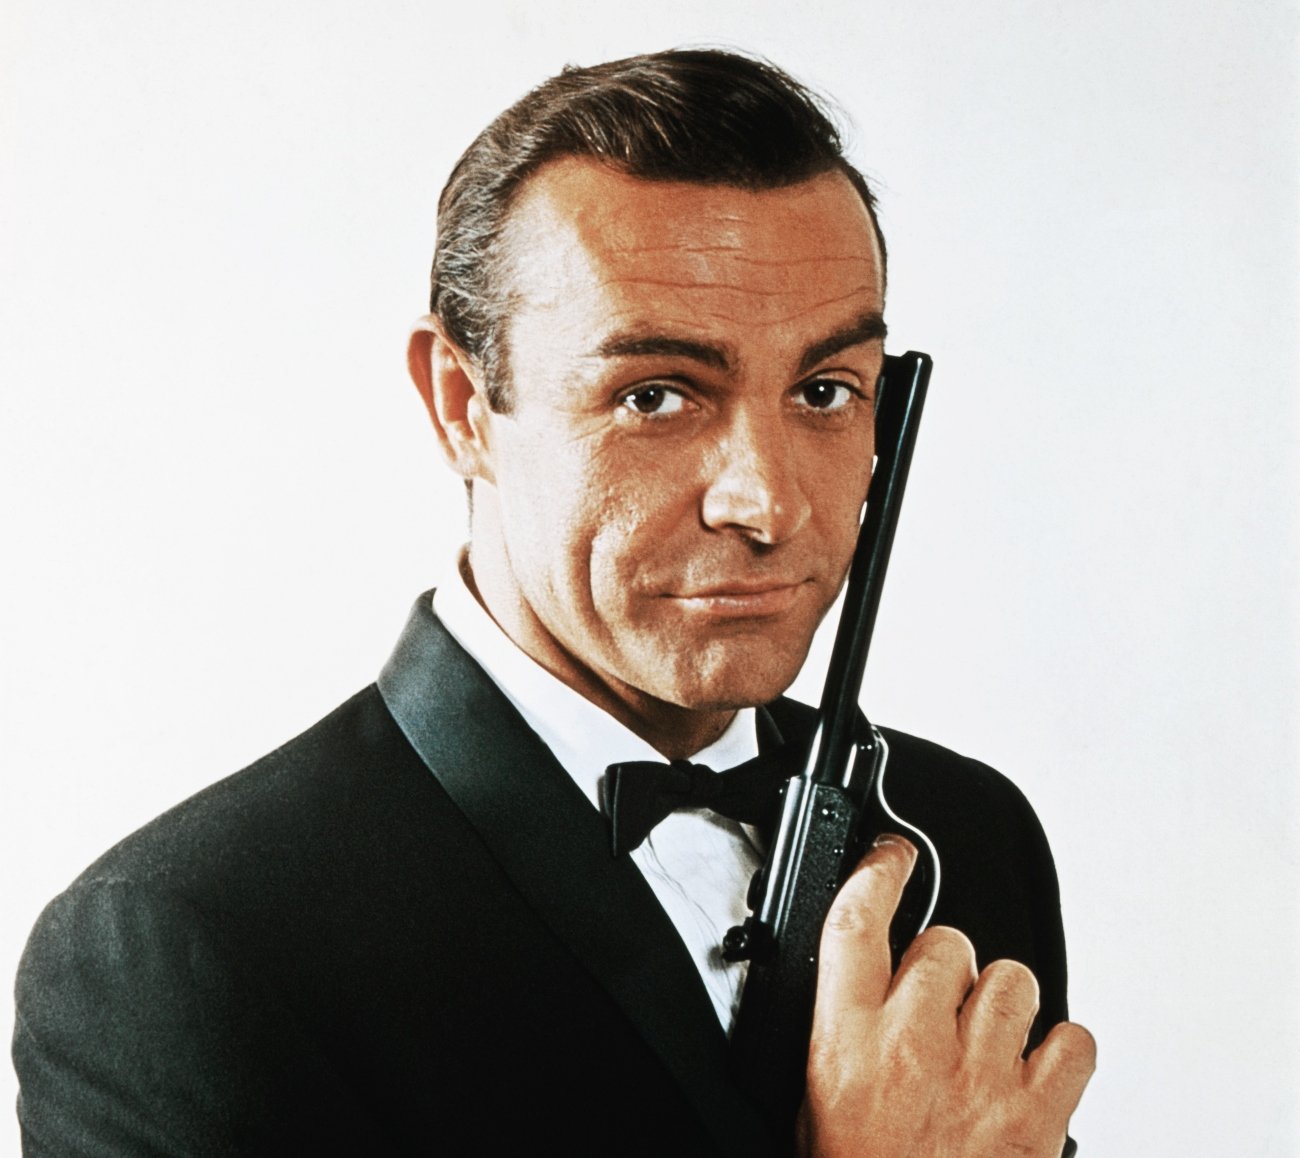 James Bond Kill Count: Which Bond Is the Deadliest?